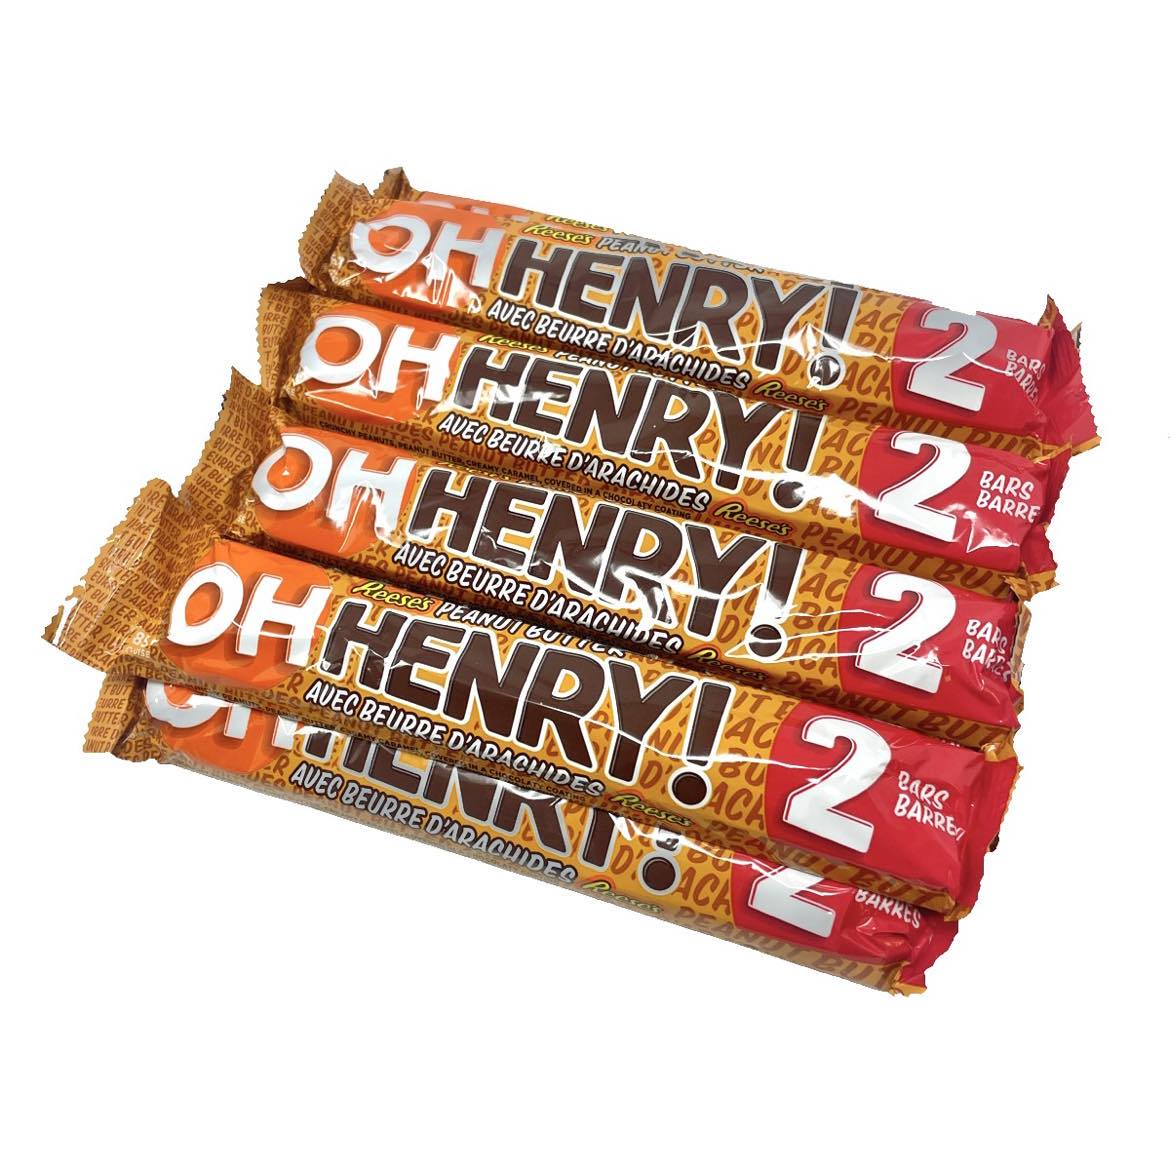 Oh Henry with Reese’s Peanut Butter (58g)